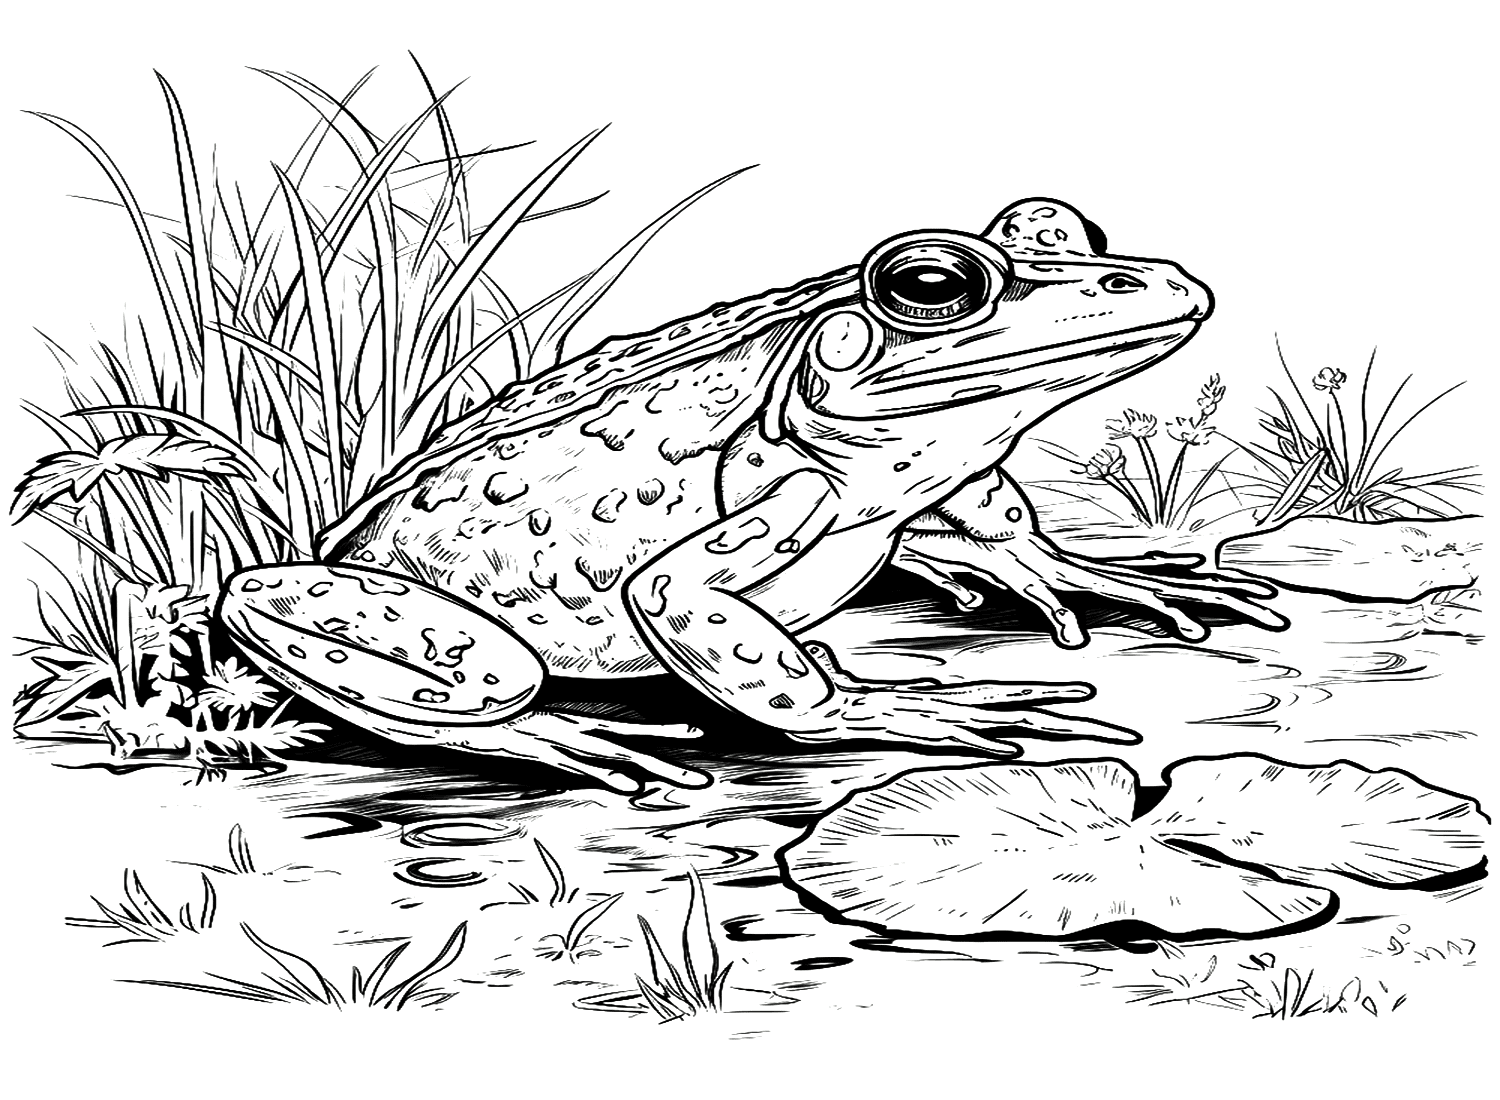 Cane Toad Floria Coloring Page from Cane Toad